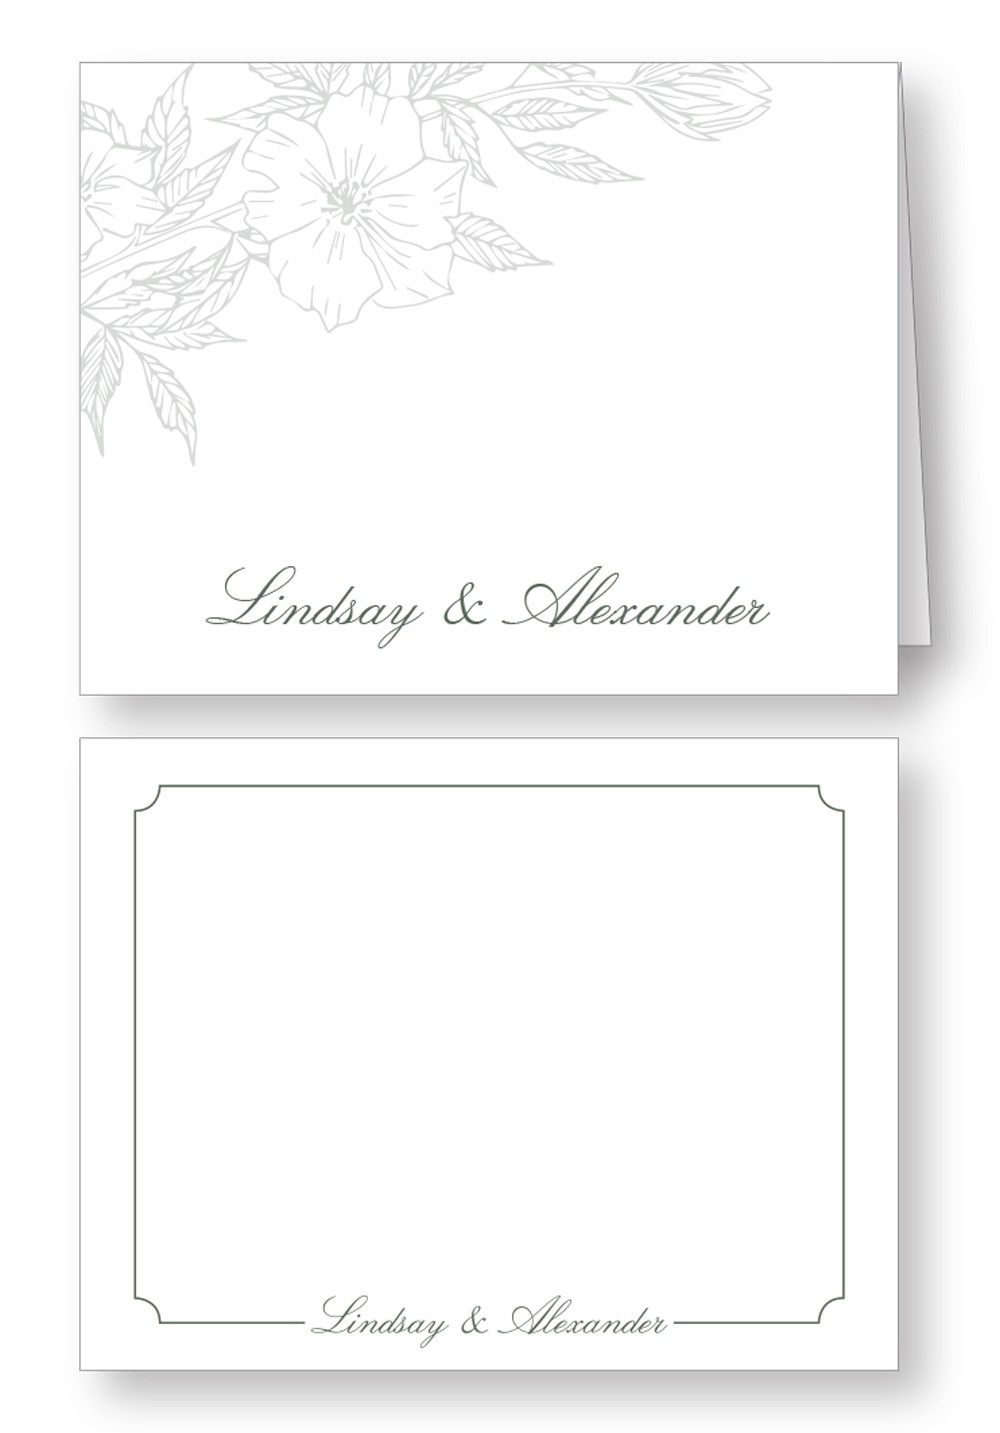 Rosemary Thank You Card | Paper Daisies Stationery